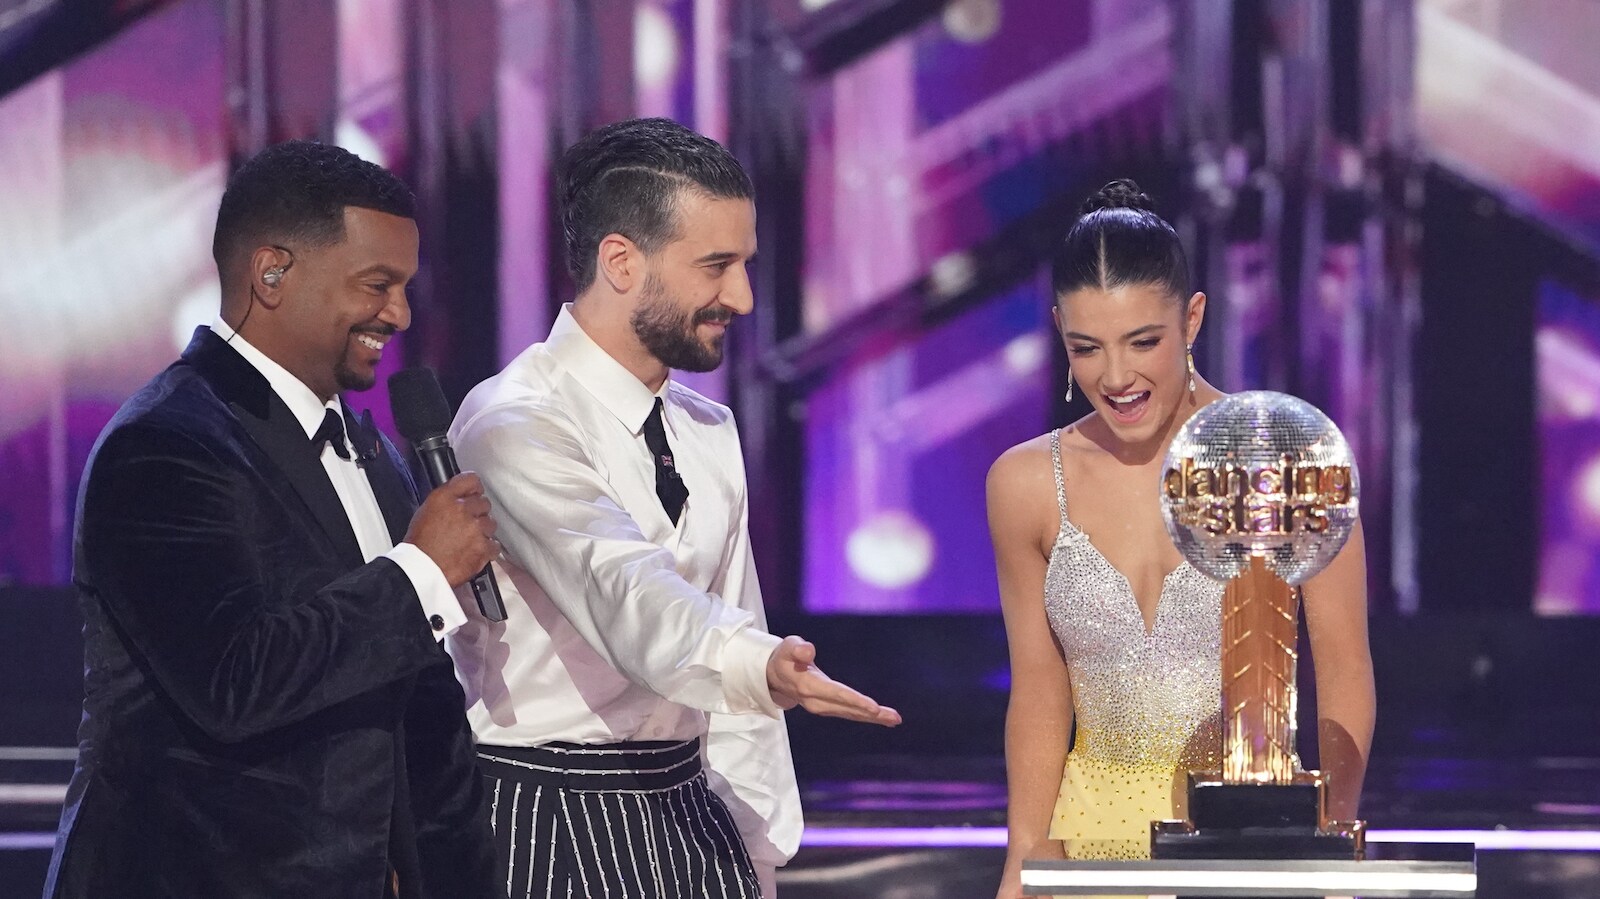 DANCING WITH THE STARS - “Finale” – The four finalists perform their final two routines in hopes of winning the mirrorball trophy. Each couple will perform a redemption dance and an unforgettable freestyle routine. A new episode of “Dancing with the Stars” will stream live MONDAY, NOV. 21 (8:00pm ET / 5:00pm PT), on Disney+. (ABC/Eric McCandless) ALFONSO RIBEIRO, MARK BALLAS, CHARLI D’AMELIO